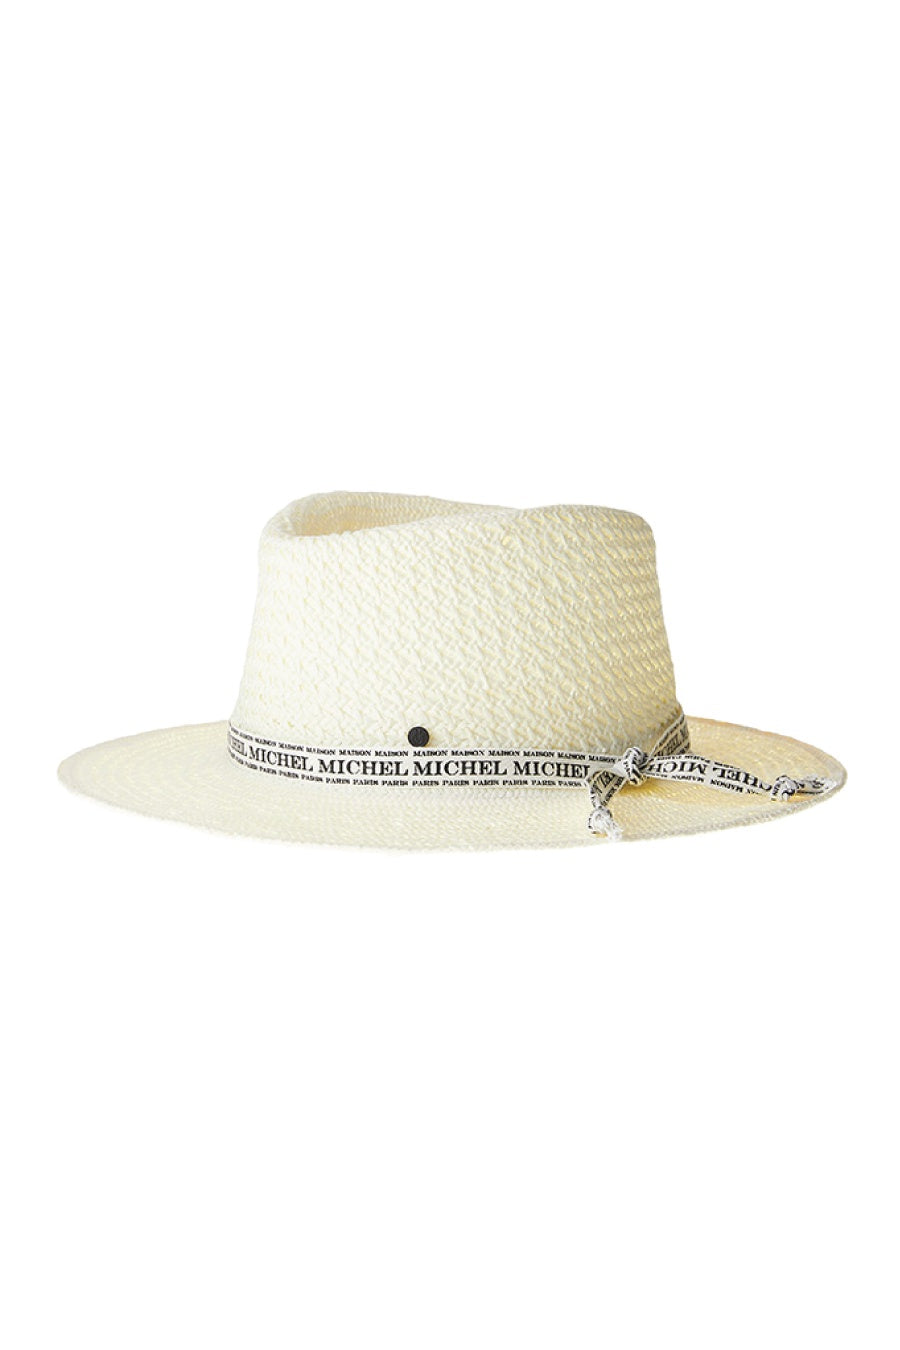 Maison Michel Andre On The Go Hat - White